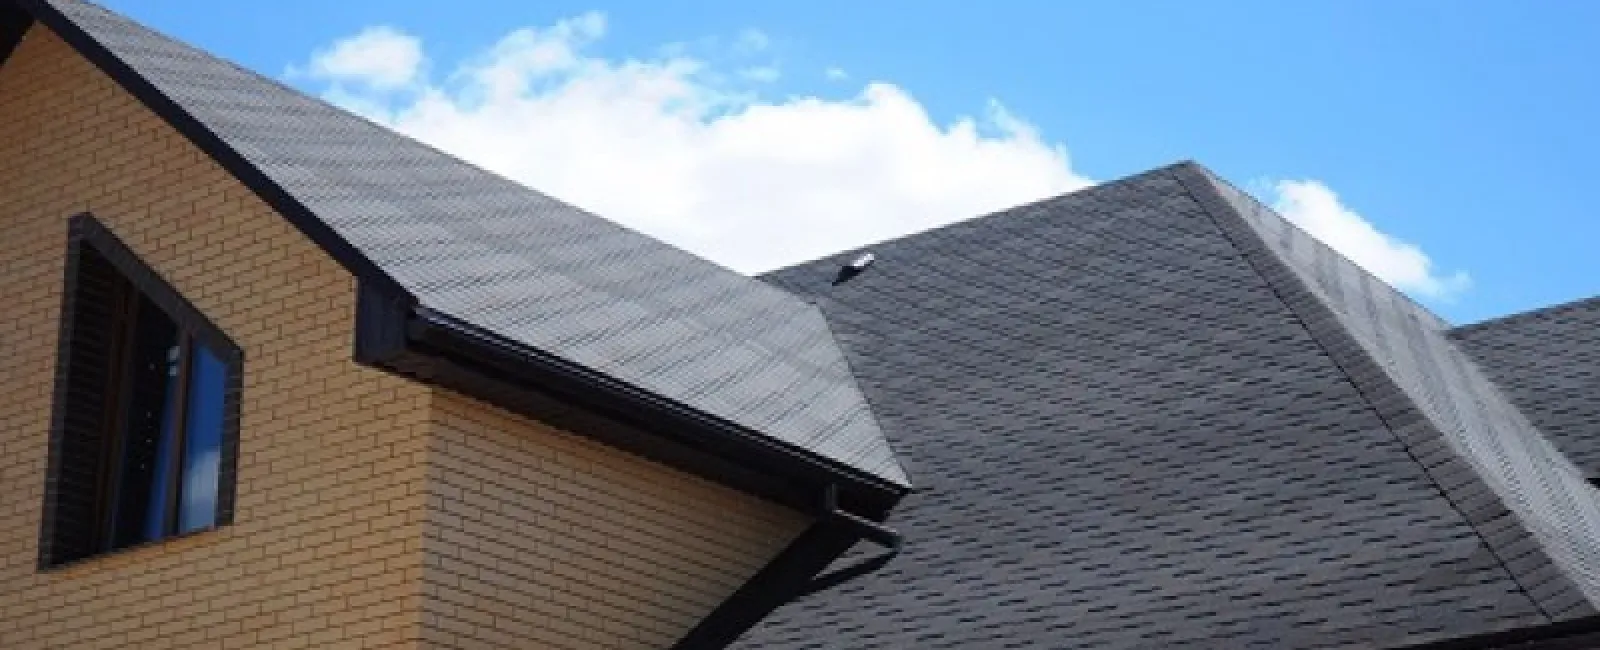 Tips to Protect Your Roof in the Summer